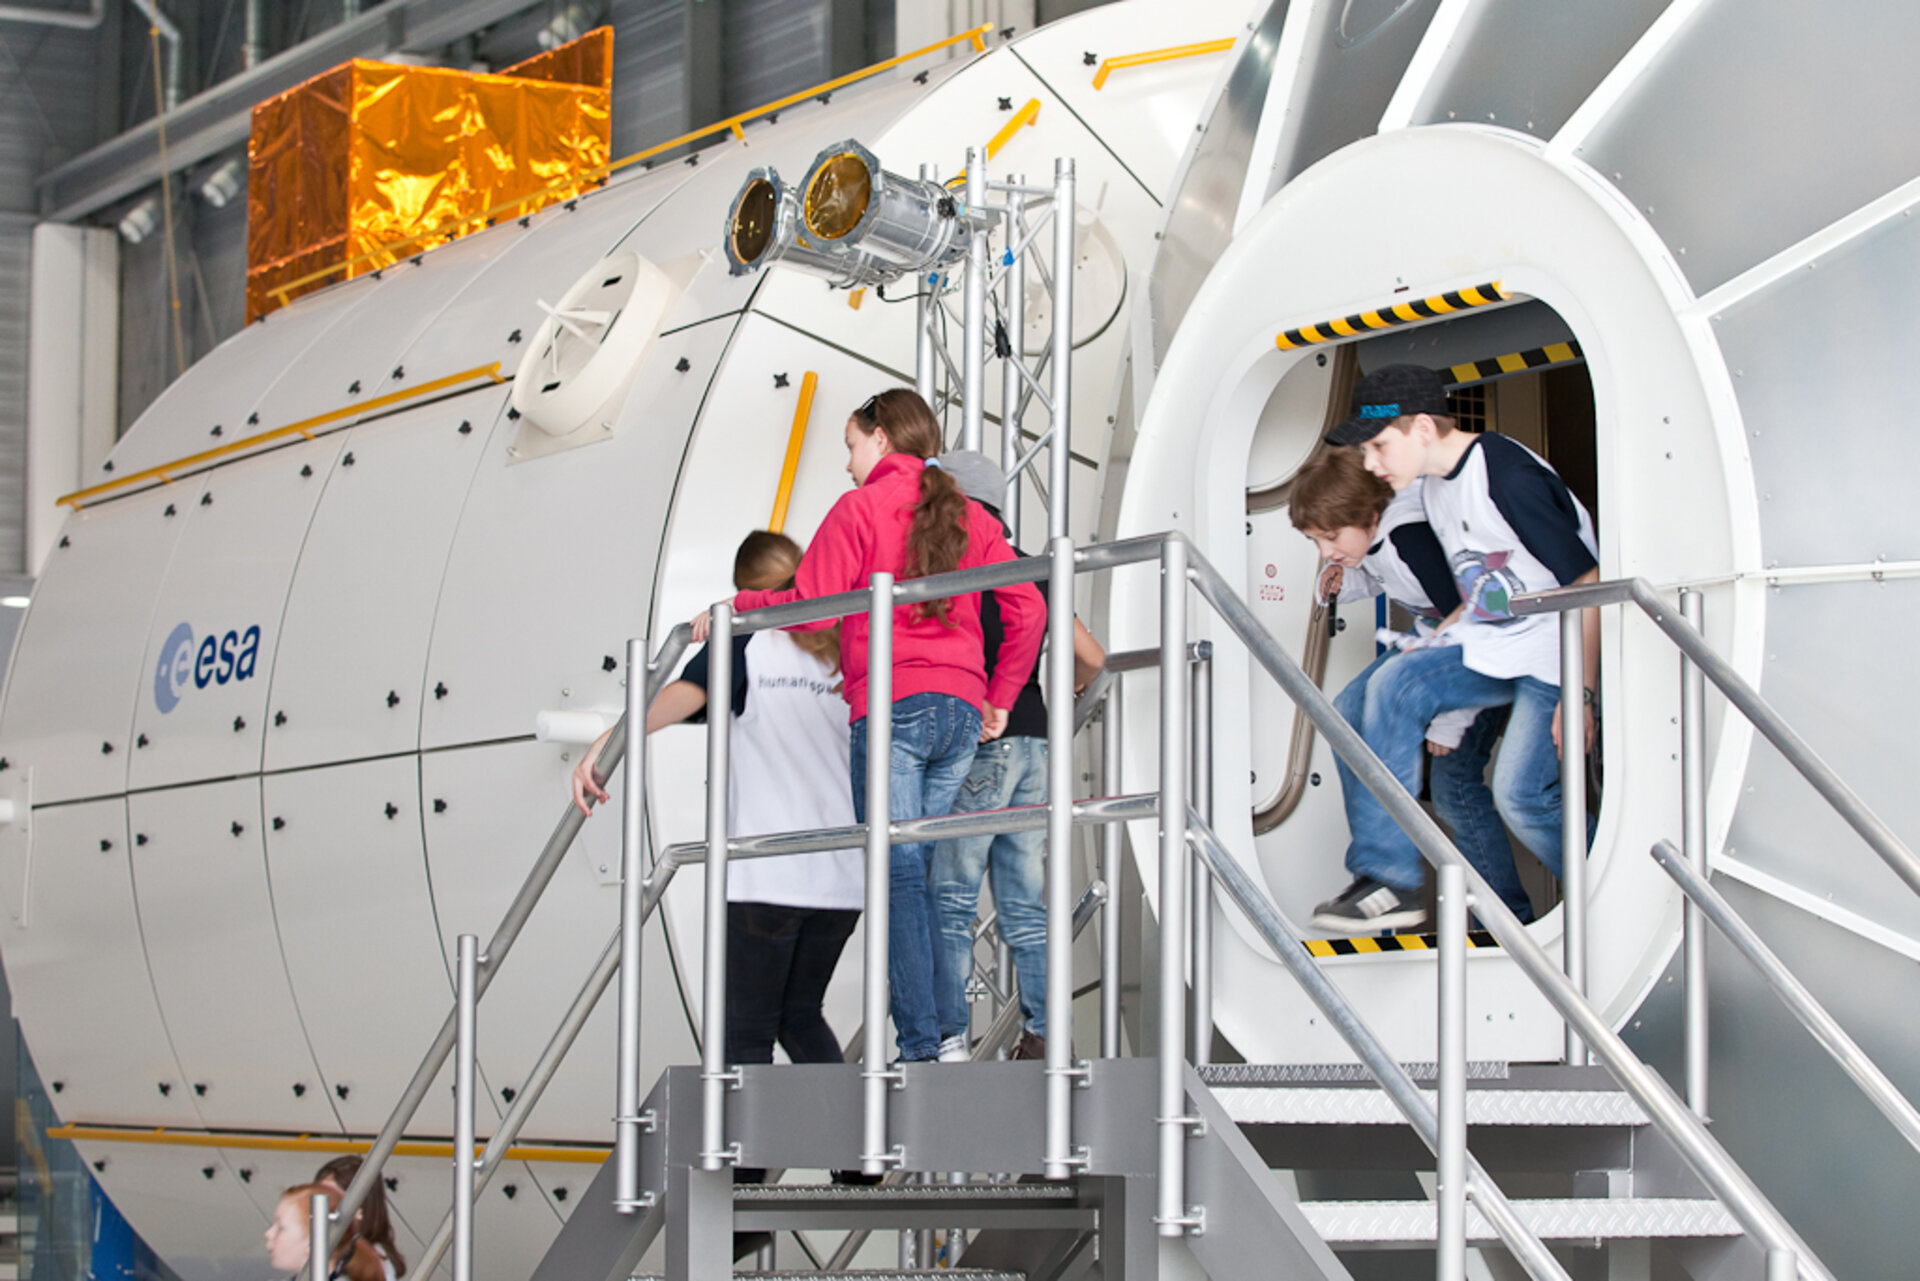 Children with the Columbus module mockup